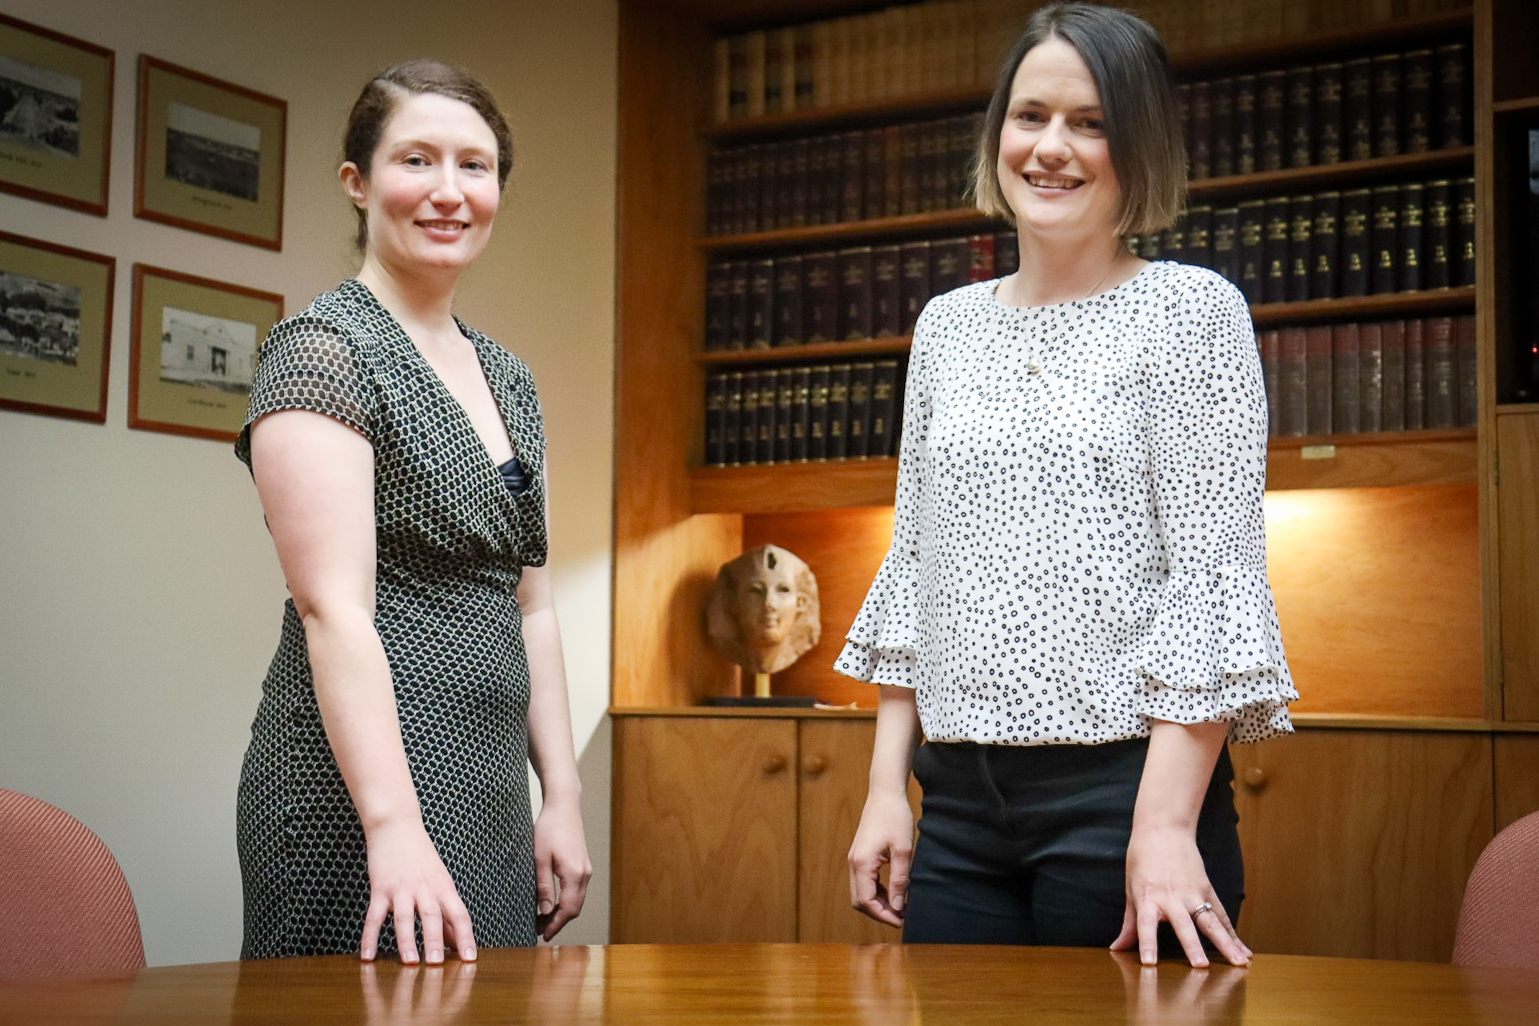 Female lawyers make history as new partners at Yass law firm